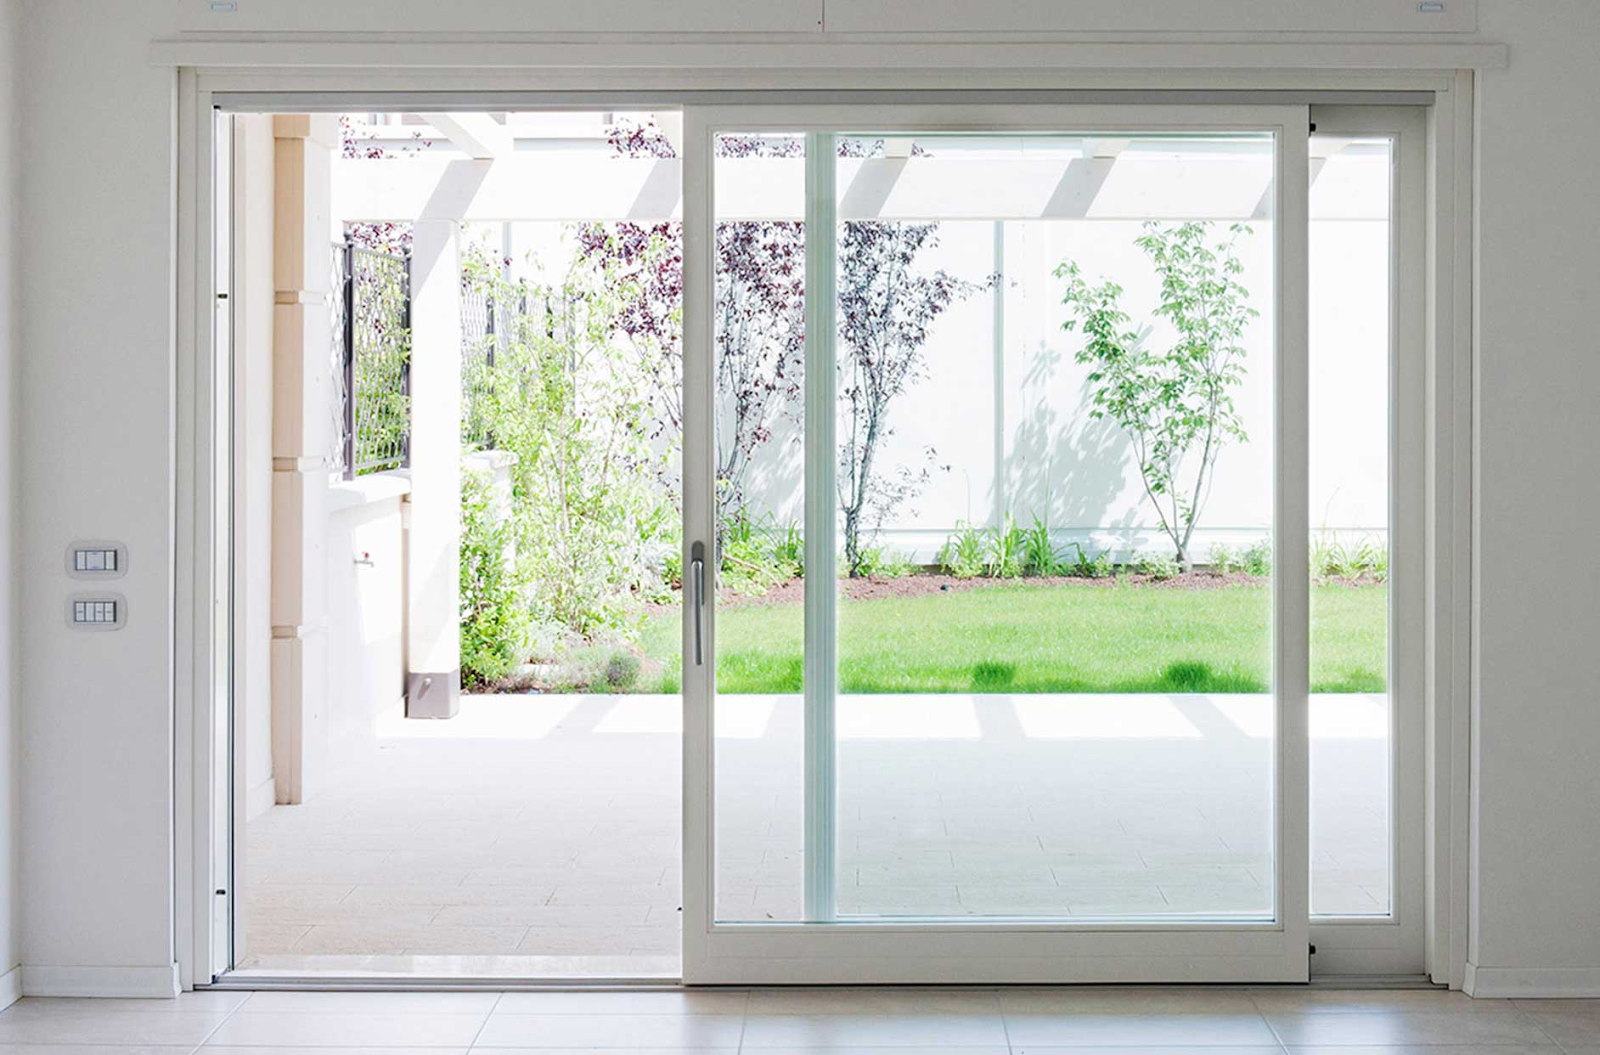 How to Choose the Best Door and Window Company?